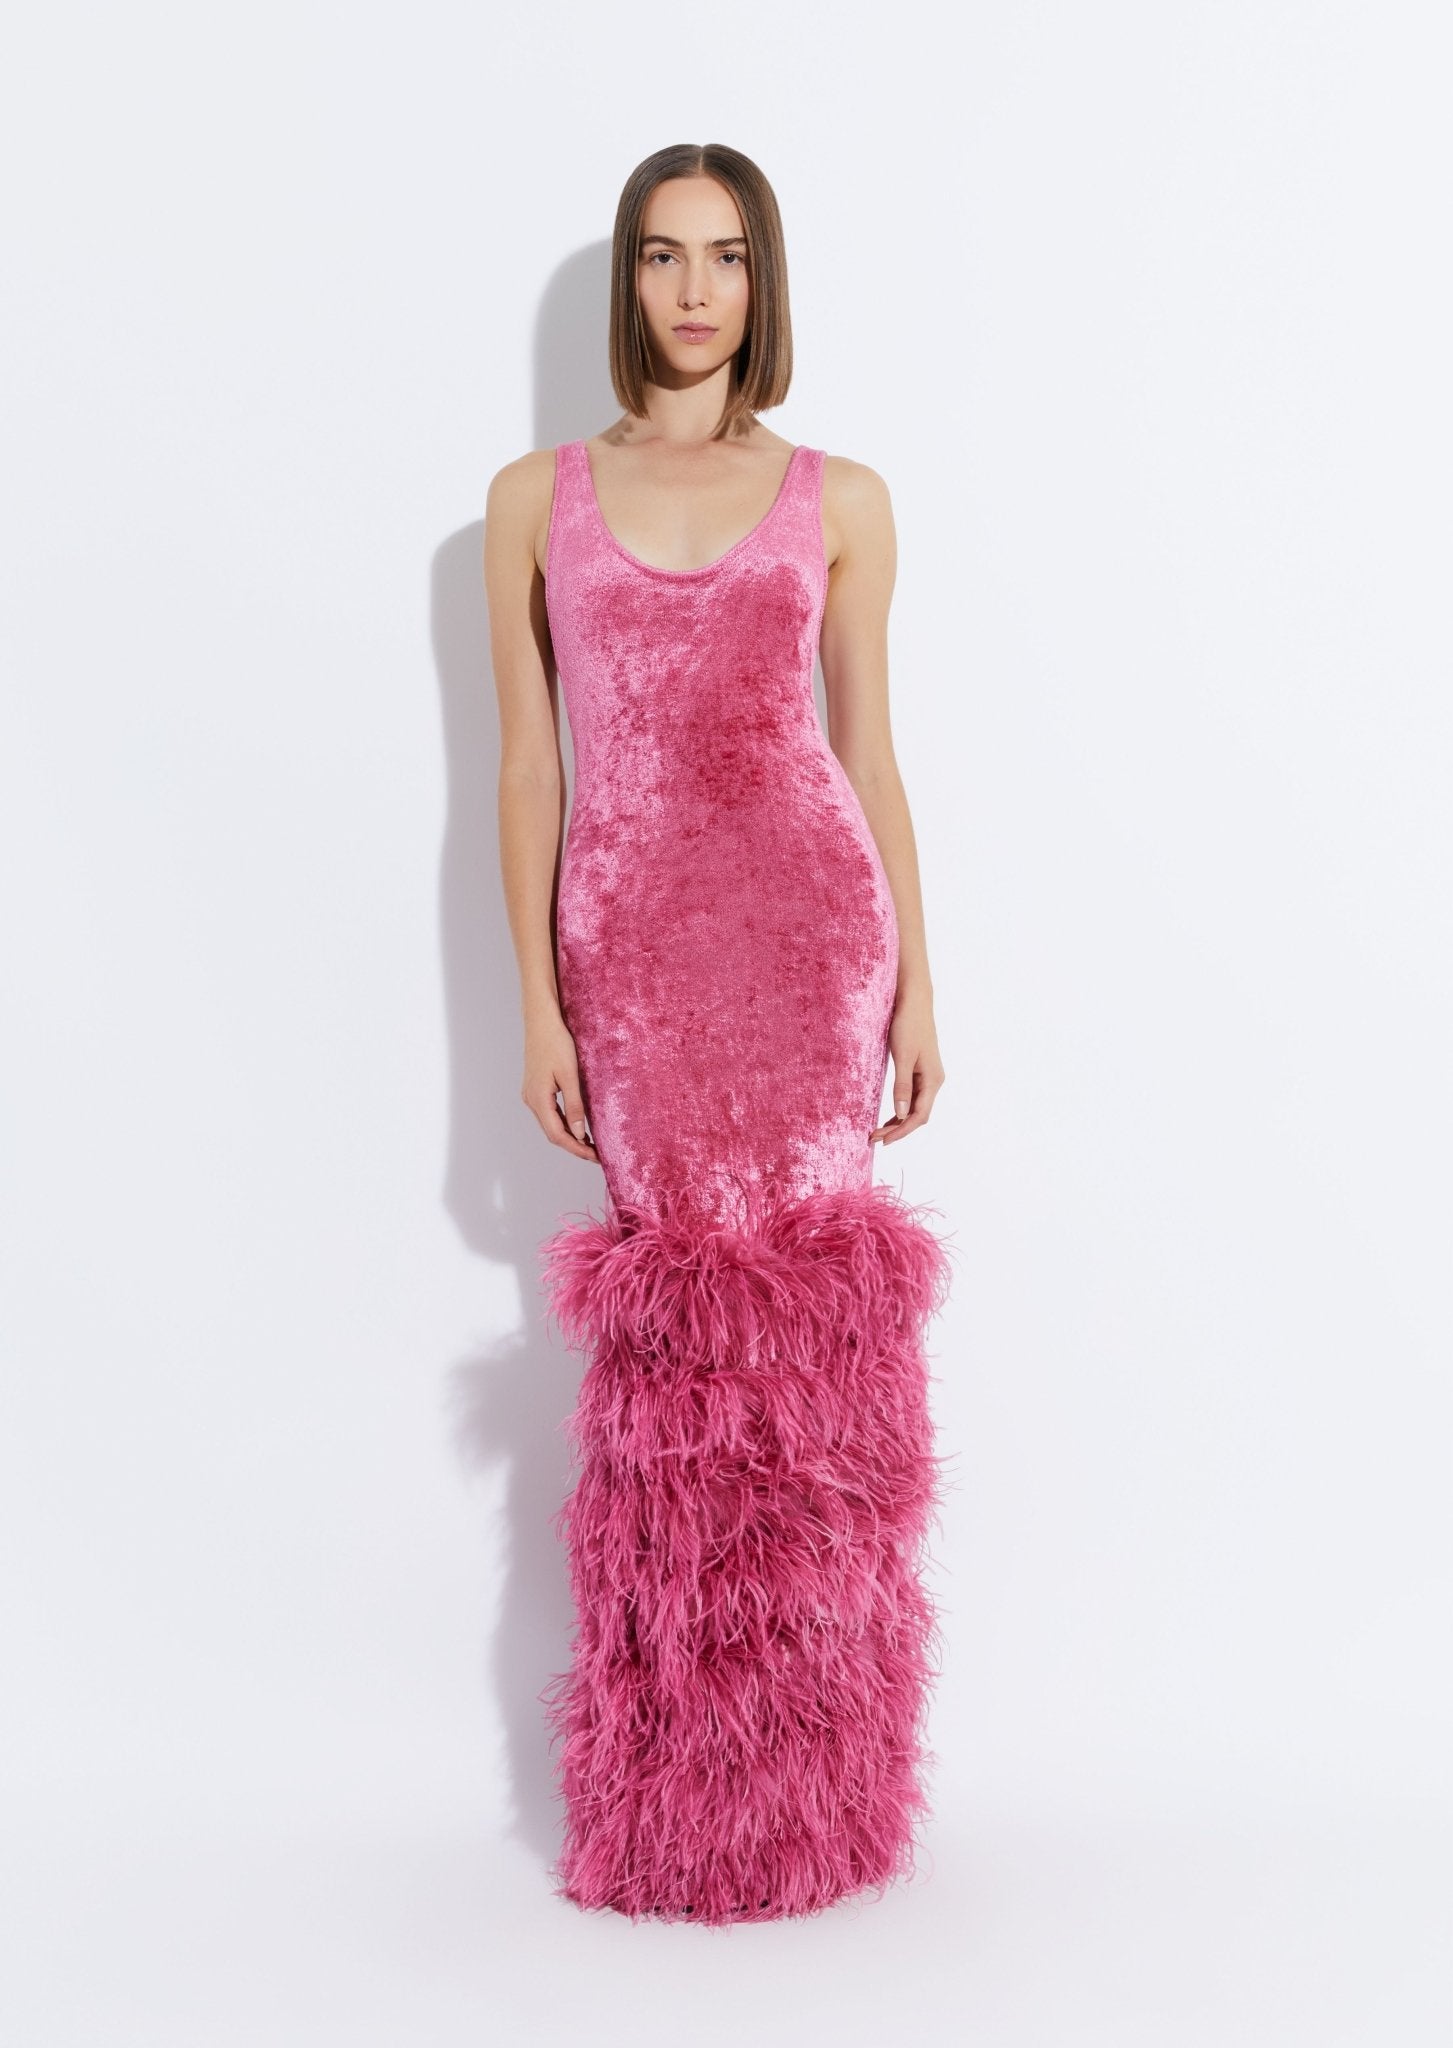 Velvet Scoop Neck Dress With Feathers - LAPOINTE